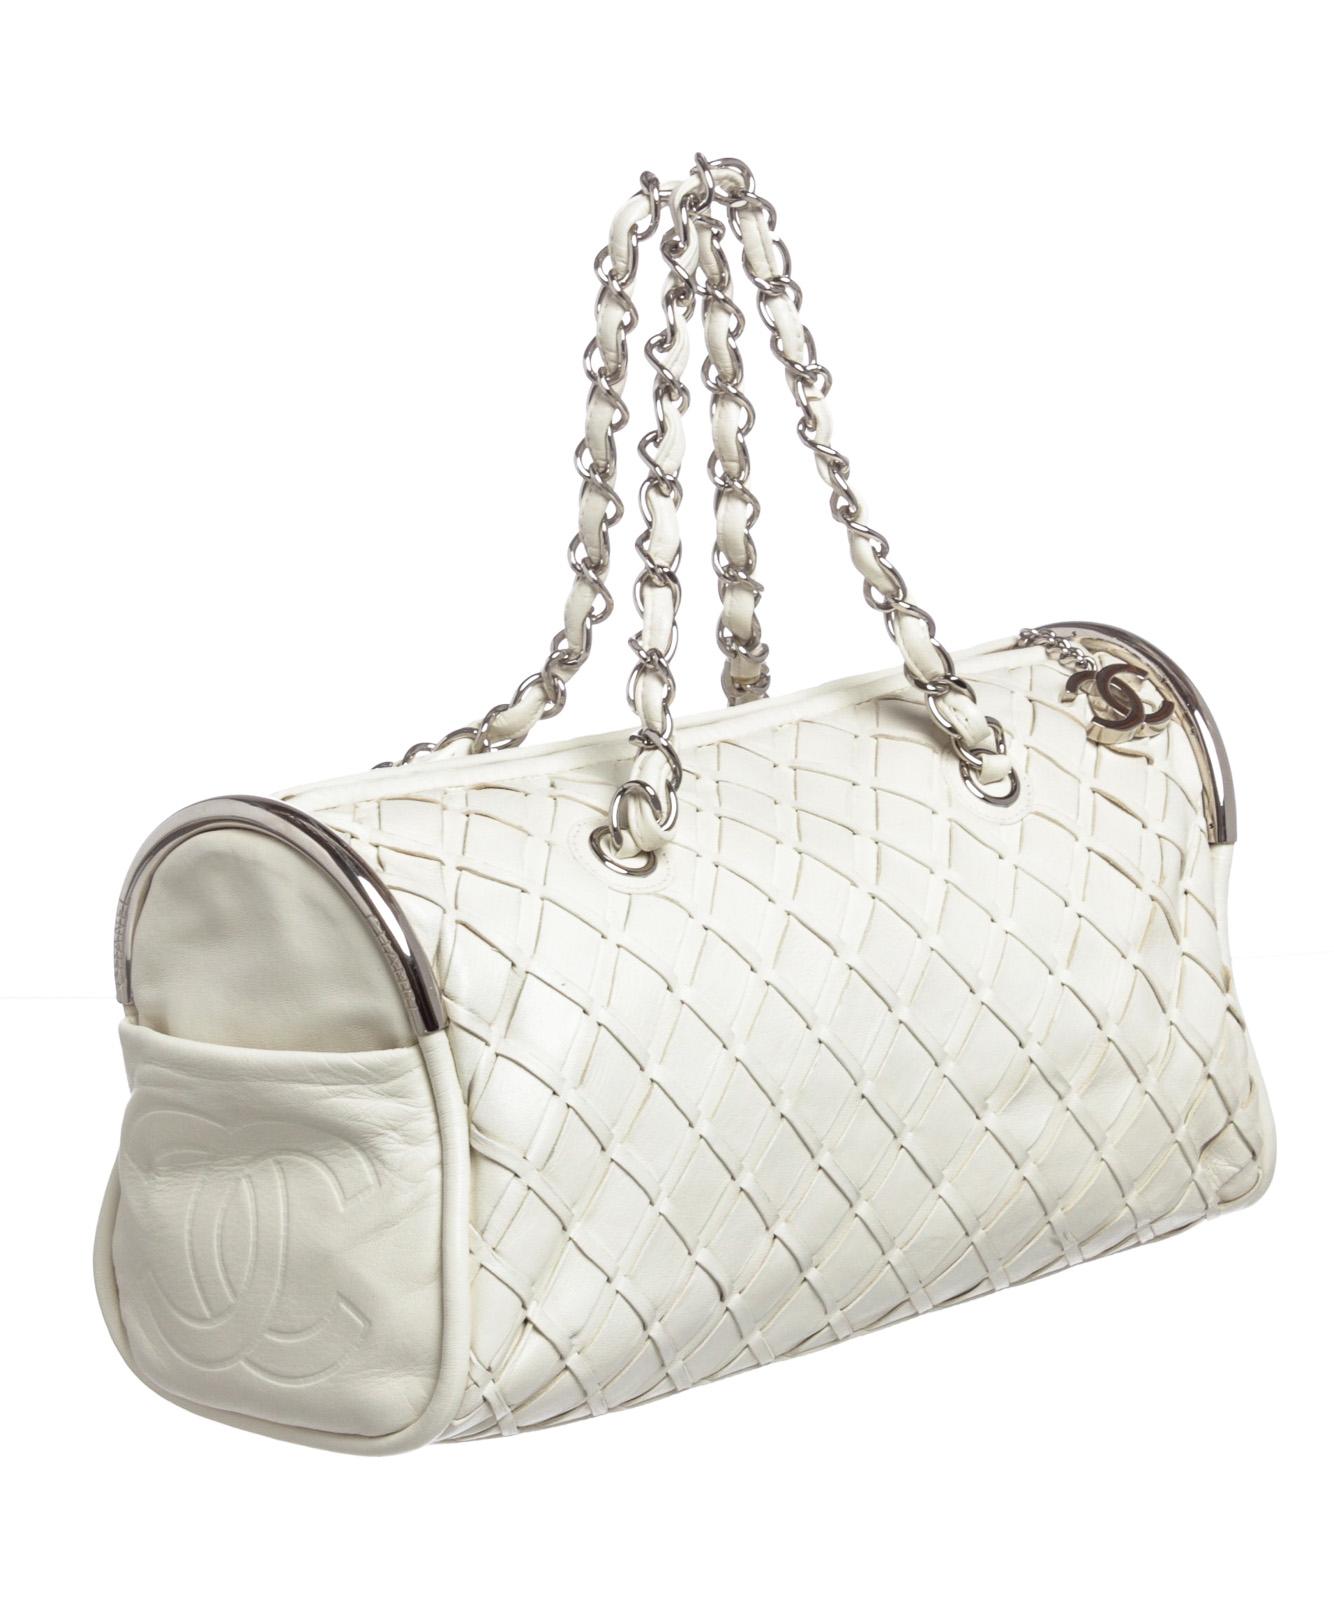 White woven leather Chanel Ultimate Soft Sombrero Bowler bag with silver-tone hardware, dual chain-link and leather shoulder straps, dual exterior slit pockets at sides featuring debossed CC logo accents, protective feet at base, creme satin lining,